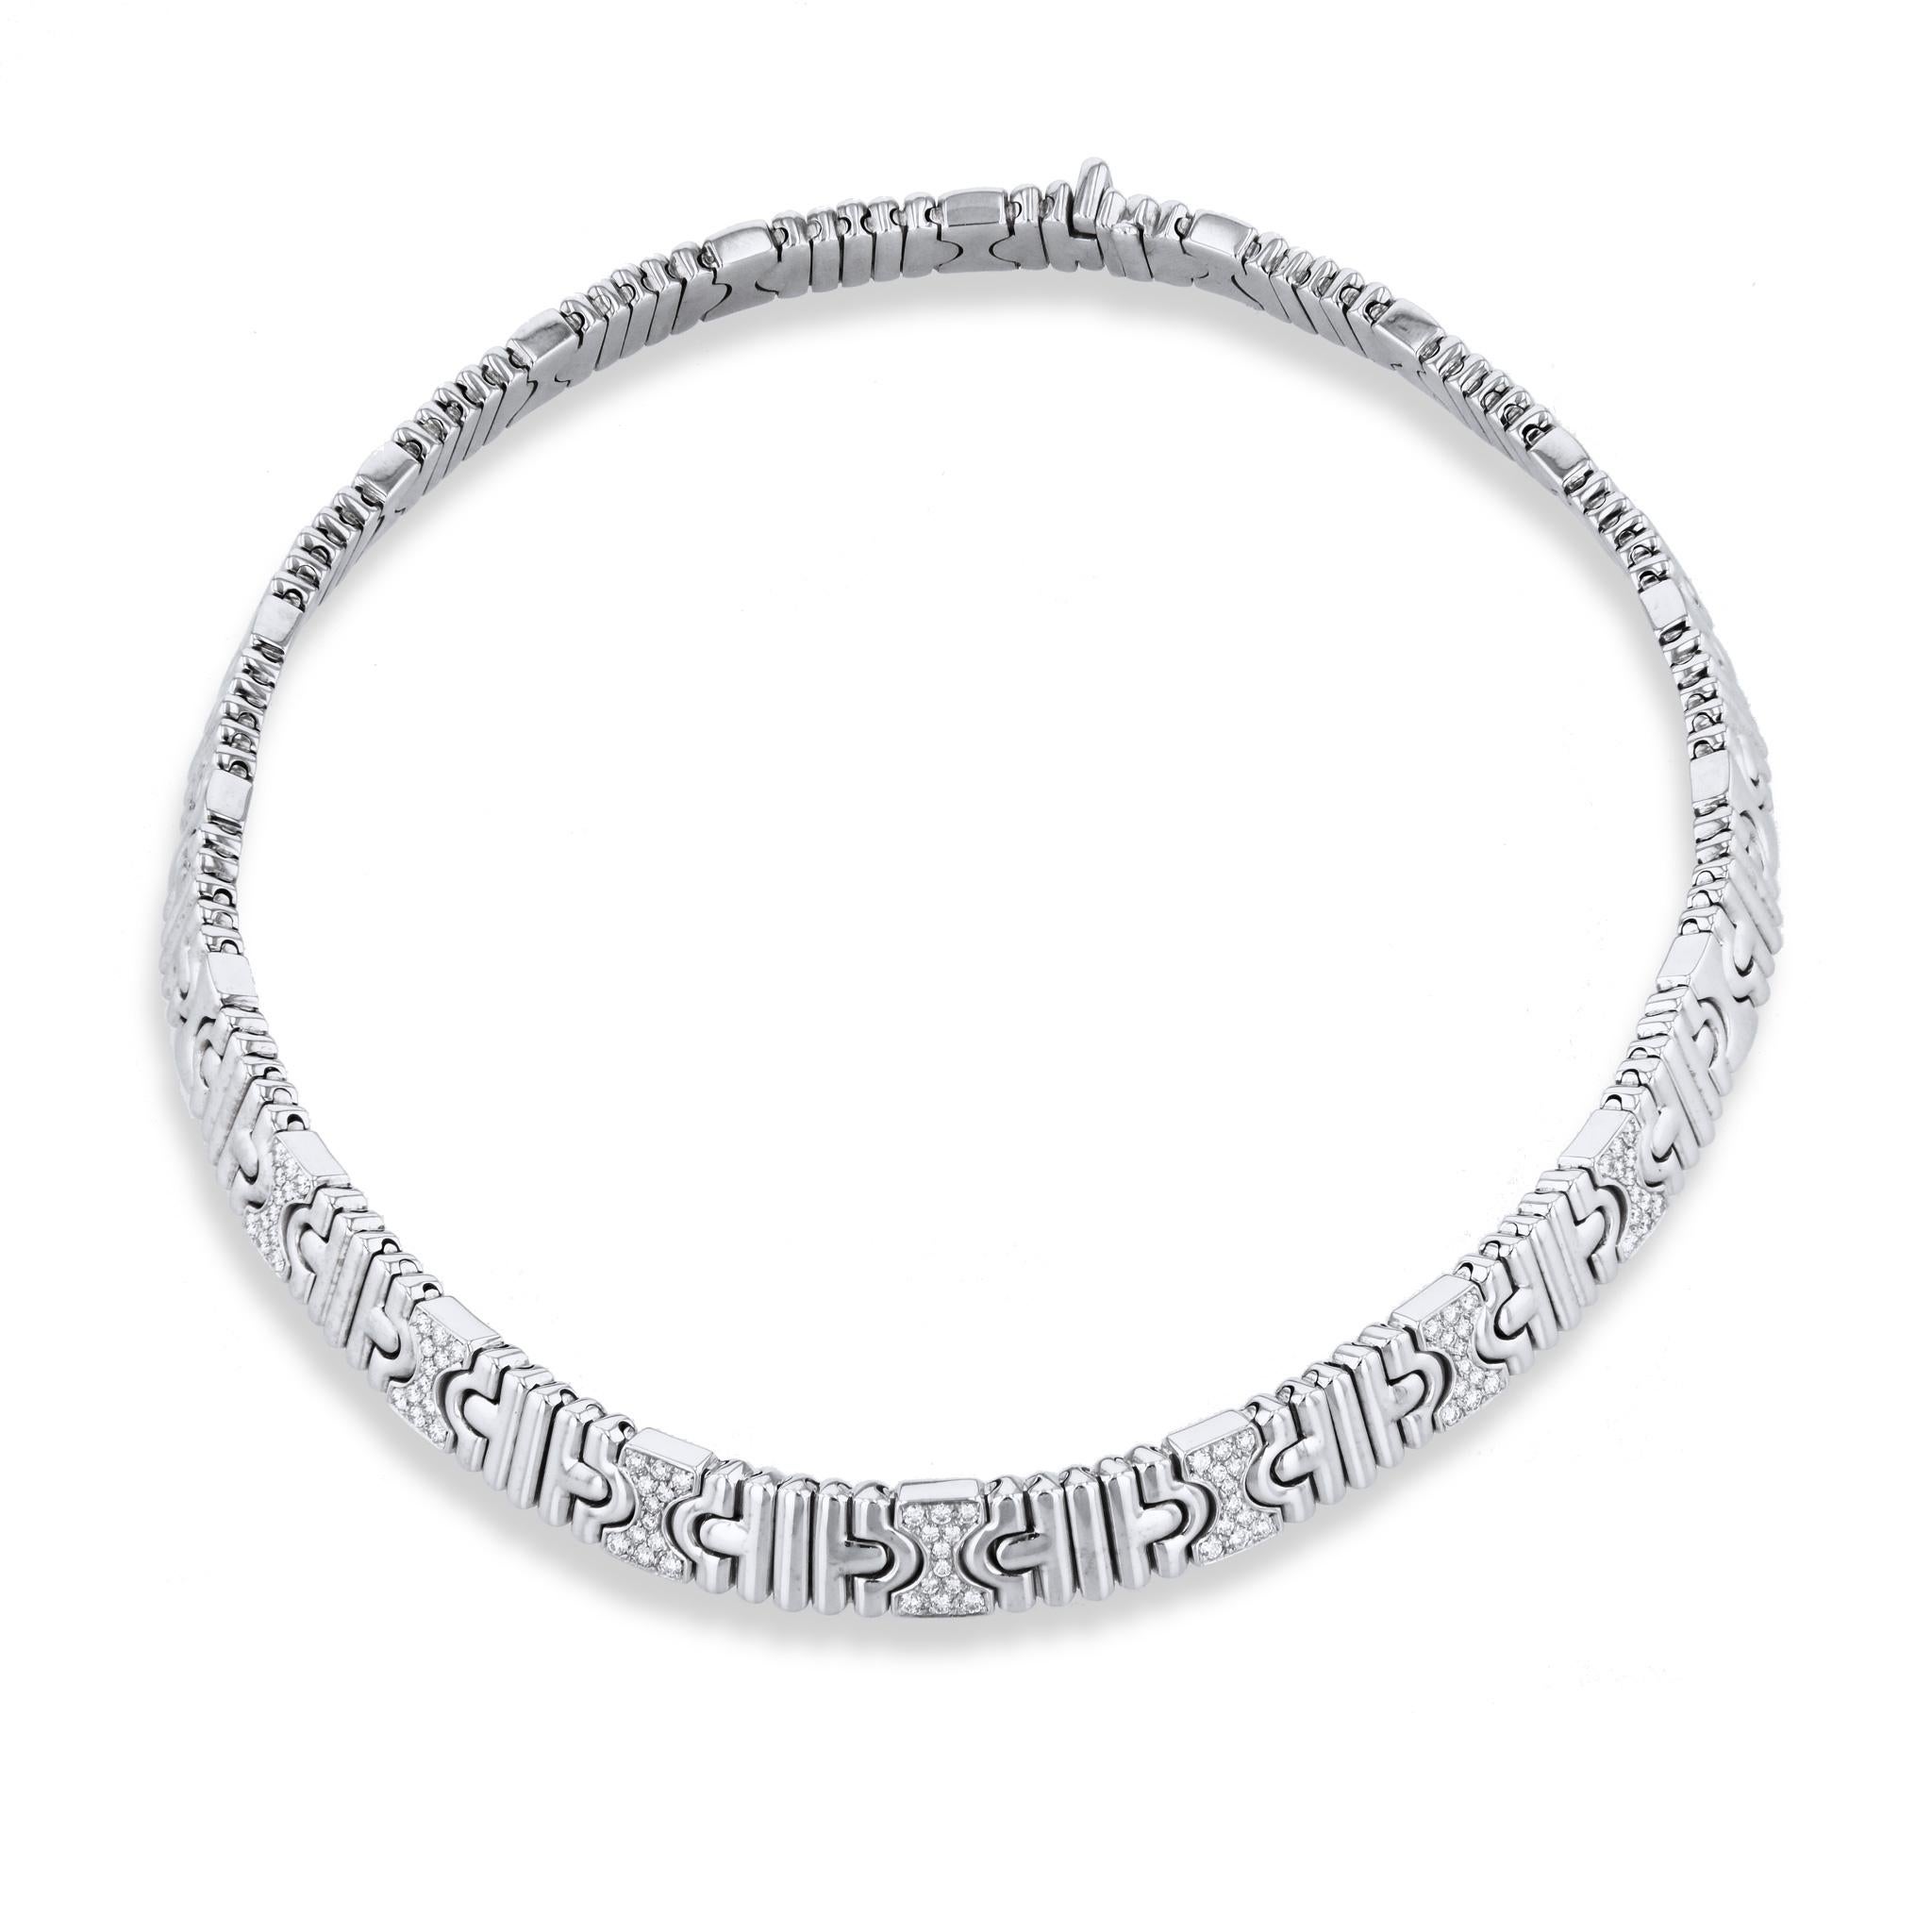 Bvlgari's timeless Parentesi Estate Necklace combines 18 karat white gold and diamonds to create a luxurious 15 inch necklace from the 2000's.

-Bvlgari Parentesi Estate Necklace
-18 karat white gold
-Diamonds: 0.85ct TW
-Circa 2000's
-Serial #